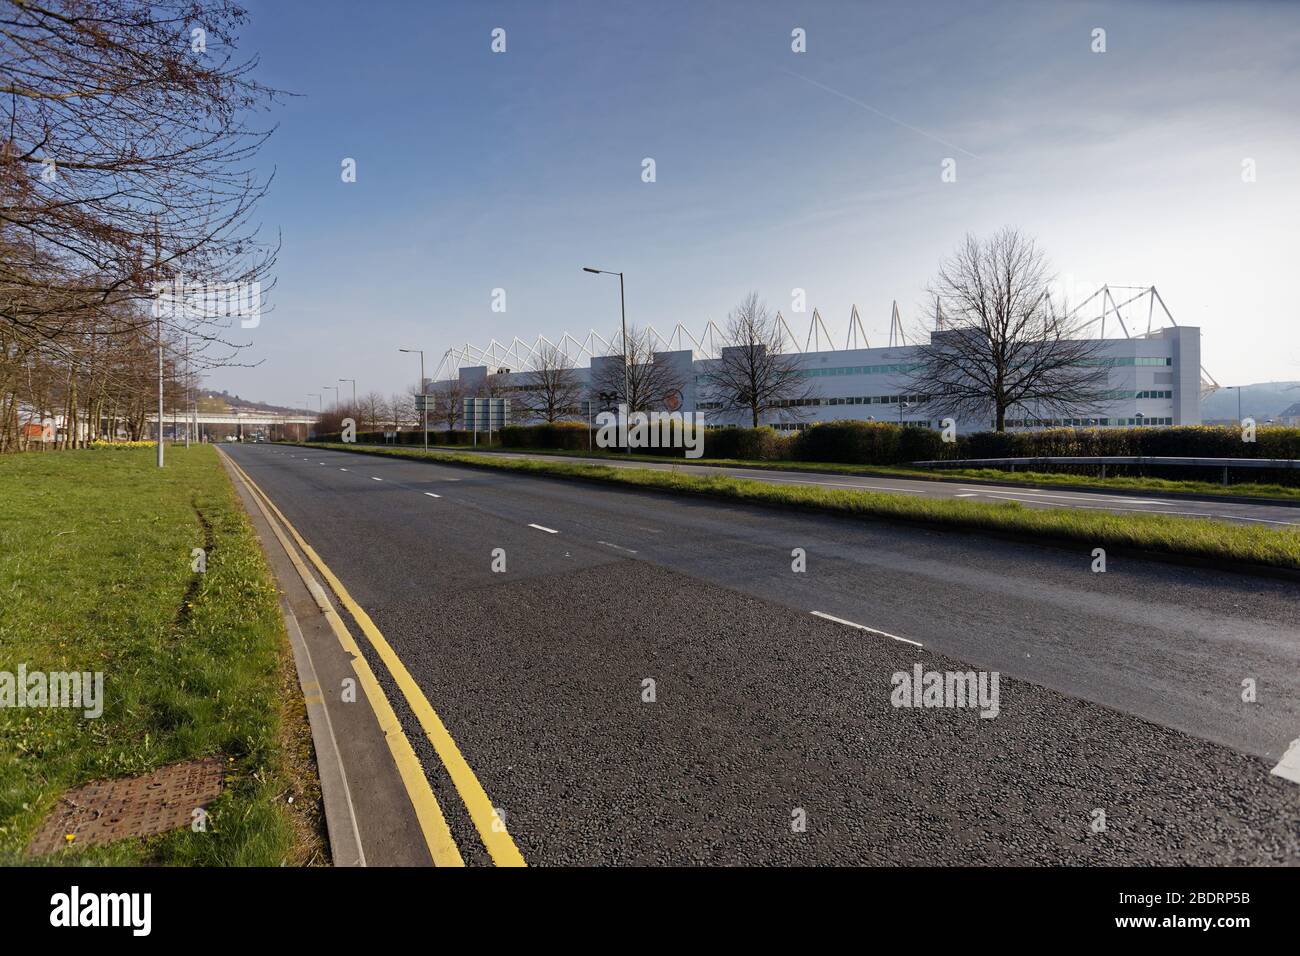 Pictured: The A4067 dual carriageway outside the Liberty Stadium is empty of cars during rush hour in Swansea, Wales, UK. Tuesday 24 March 2020 Re: Co Stock Photo